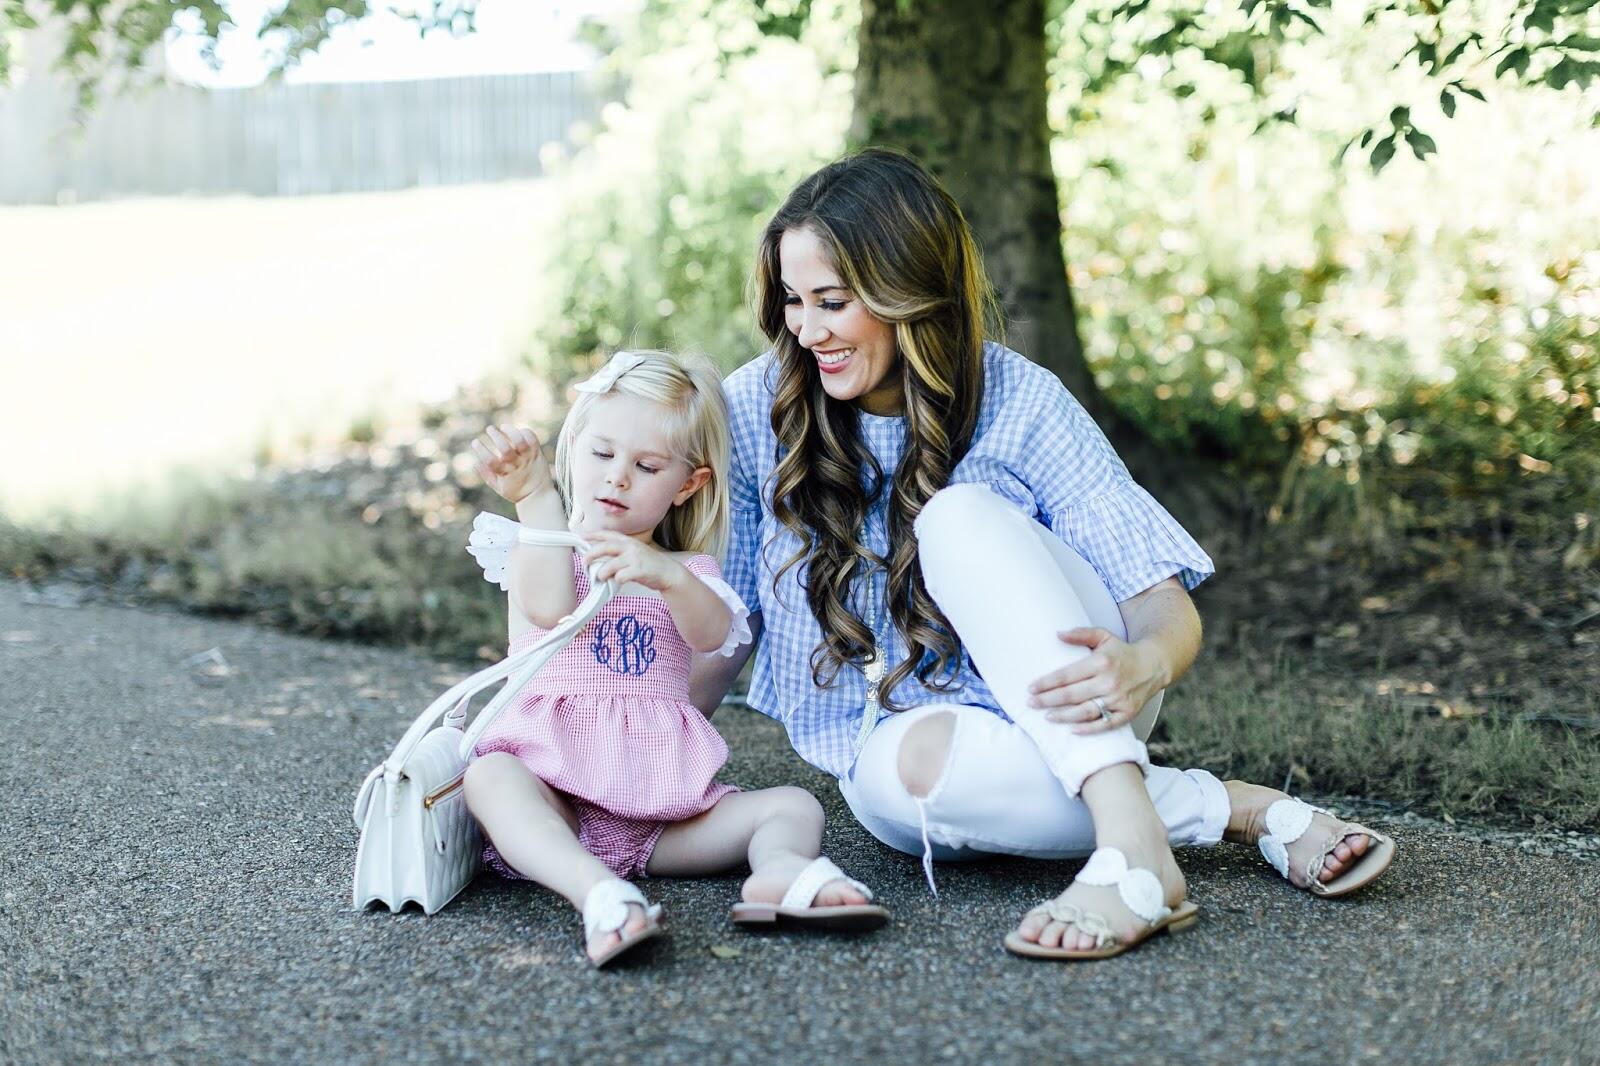 Mamas & Minis Collective - Summer Sandals with Jack Rogers by fashion blogger Laura of Walking in Memphis in High Heels